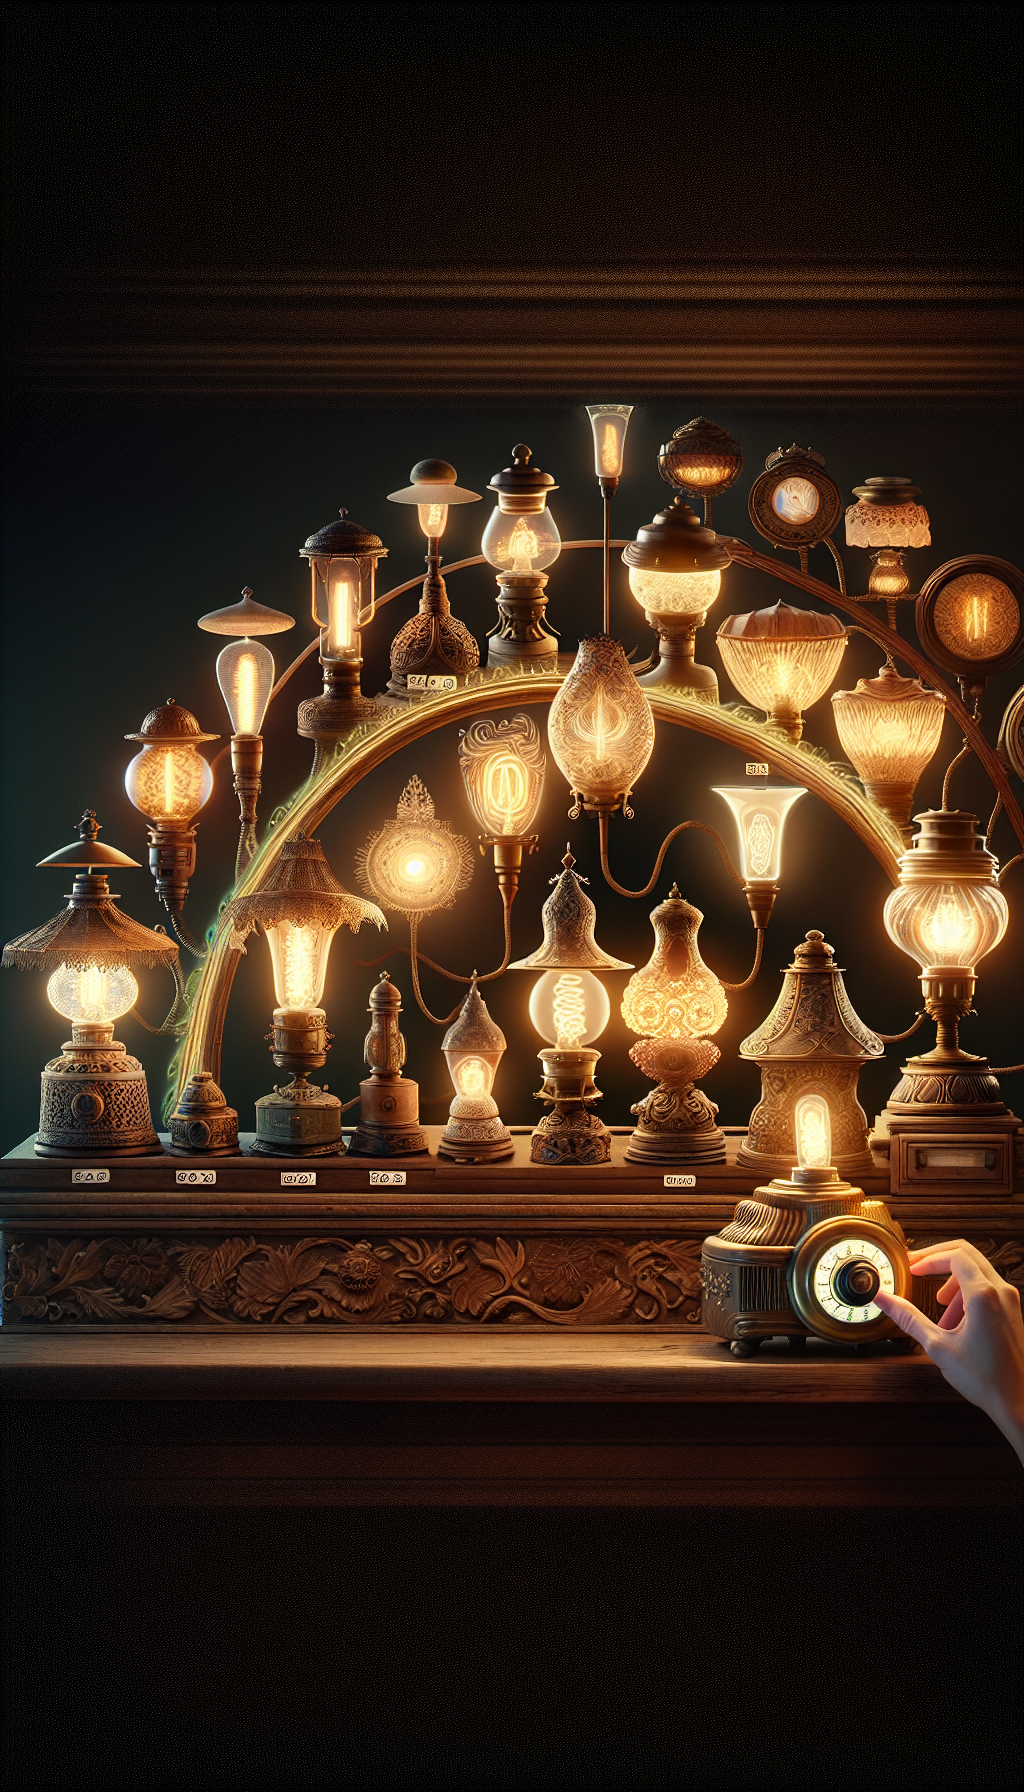 A whimsical timeline unfurls in the image, winding through era-specific scenes with ornate electric hurricane lamps casting warm glows. At the front, a hand turns a dial, transitioning the lamps from vintage to antique, their intricate details and patinas intensifying, symbolizing the rising value of antiques over time. The piece culminates in an opulent, illuminated display case showcasing a particularly valuable specimen.

16:9